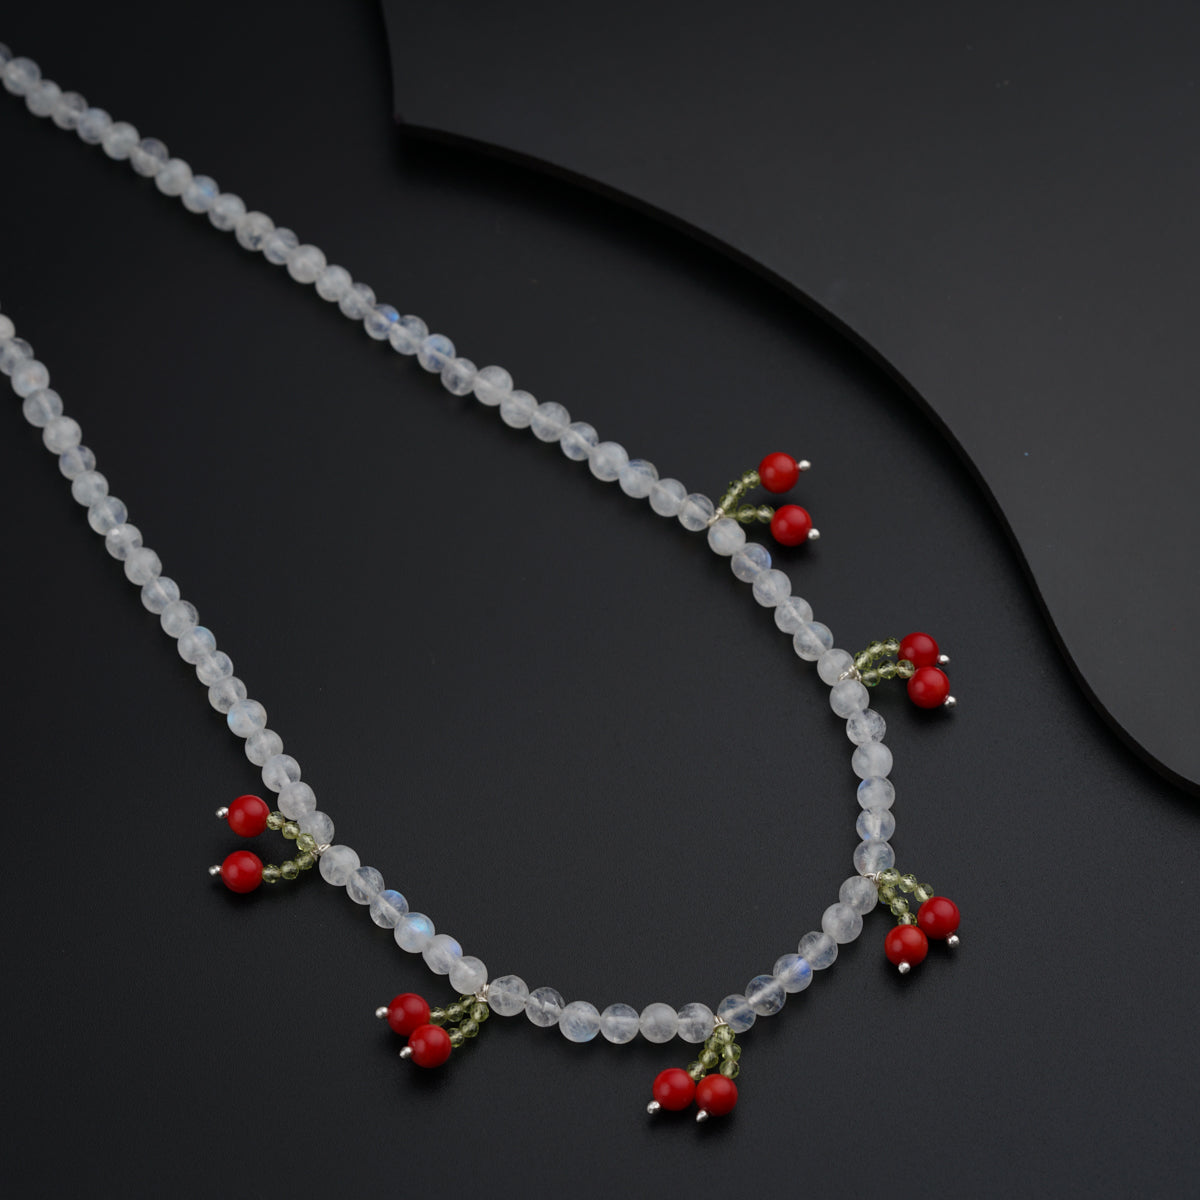 a necklace with beads and red berries on it